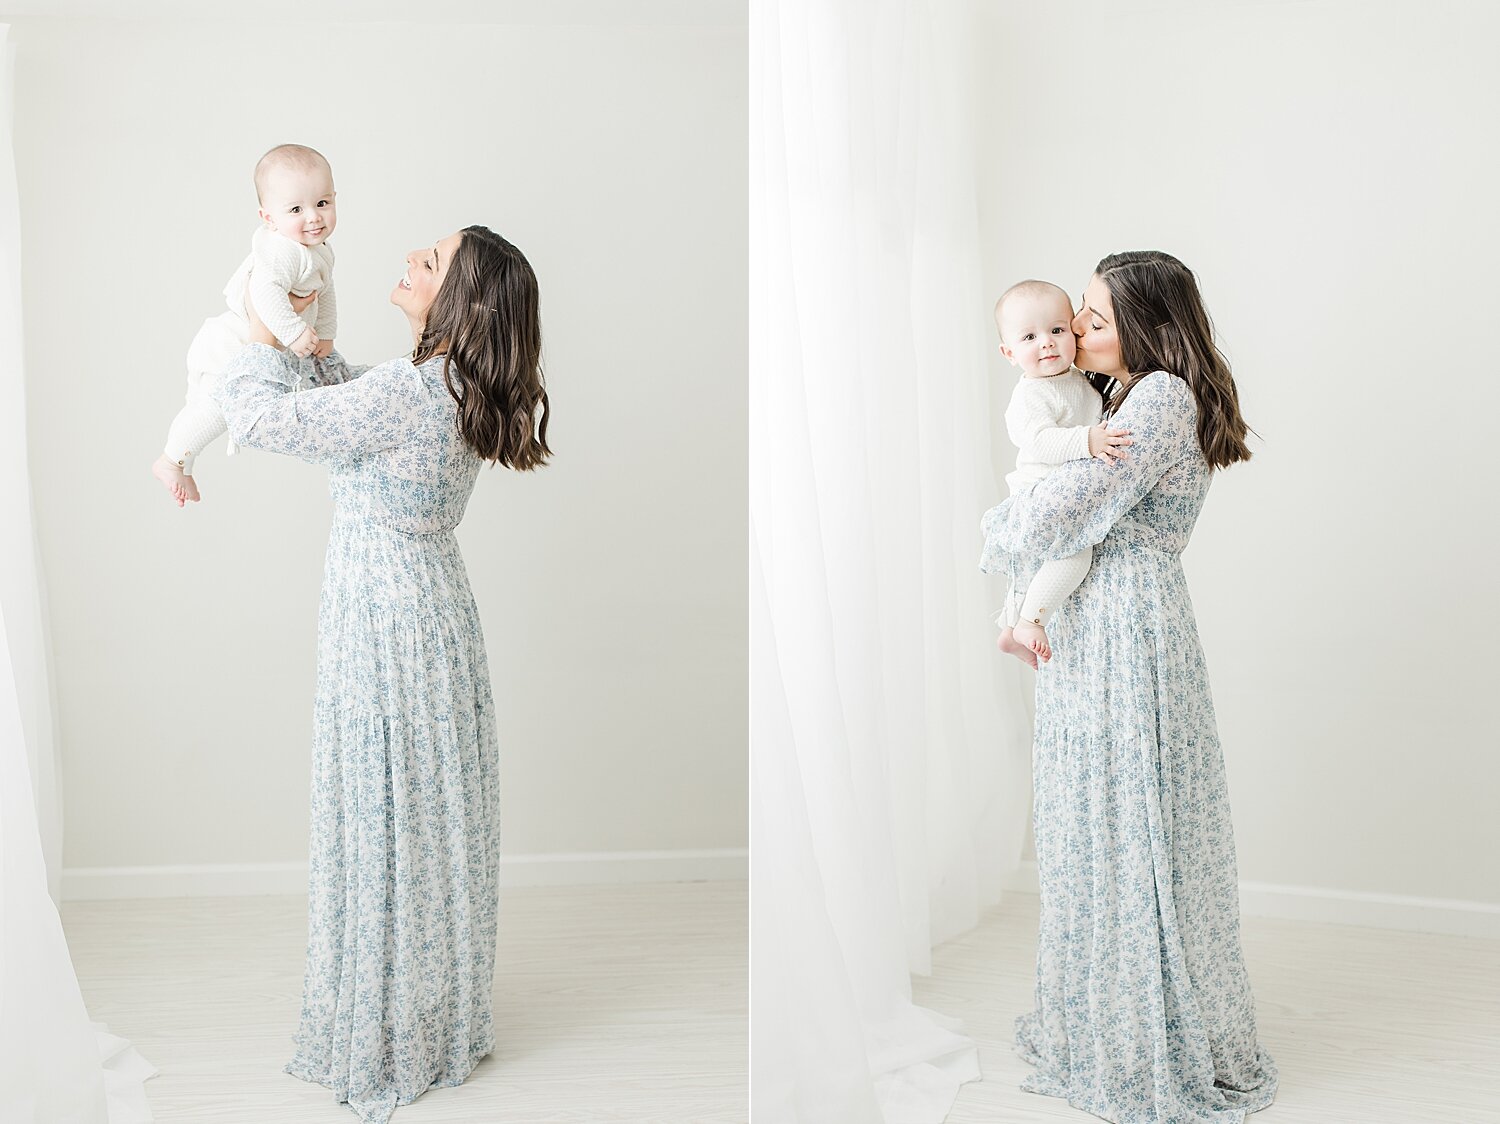 Mom and baby boy during milestone photoshoot at 8 months. Photos by Kristin Wood Photography.